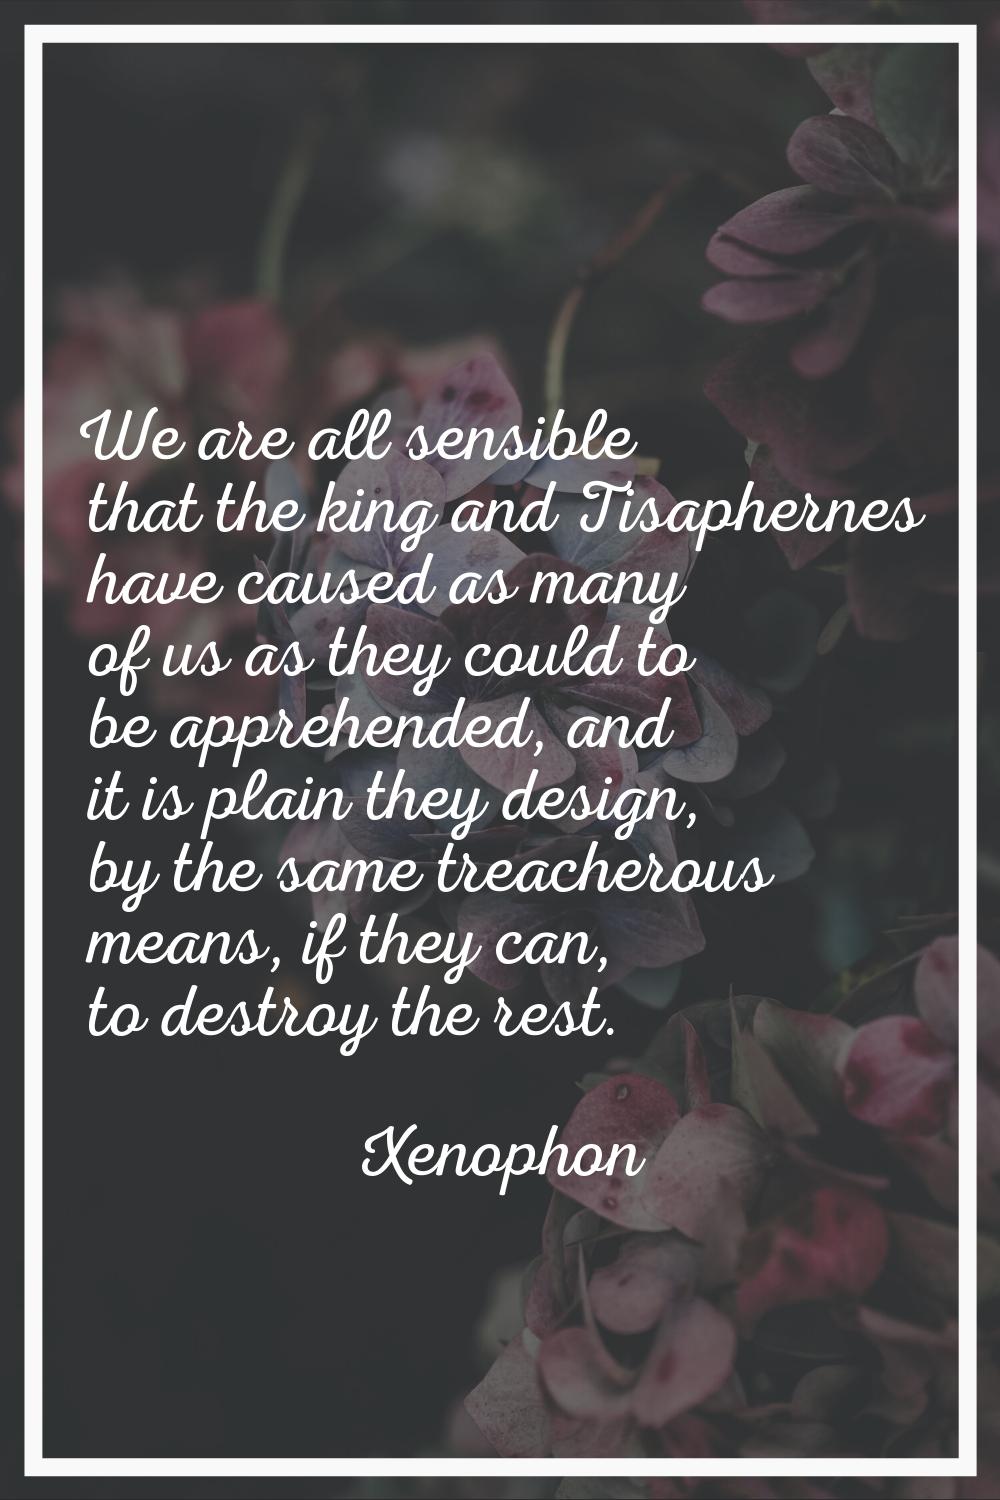 We are all sensible that the king and Tisaphernes have caused as many of us as they could to be app